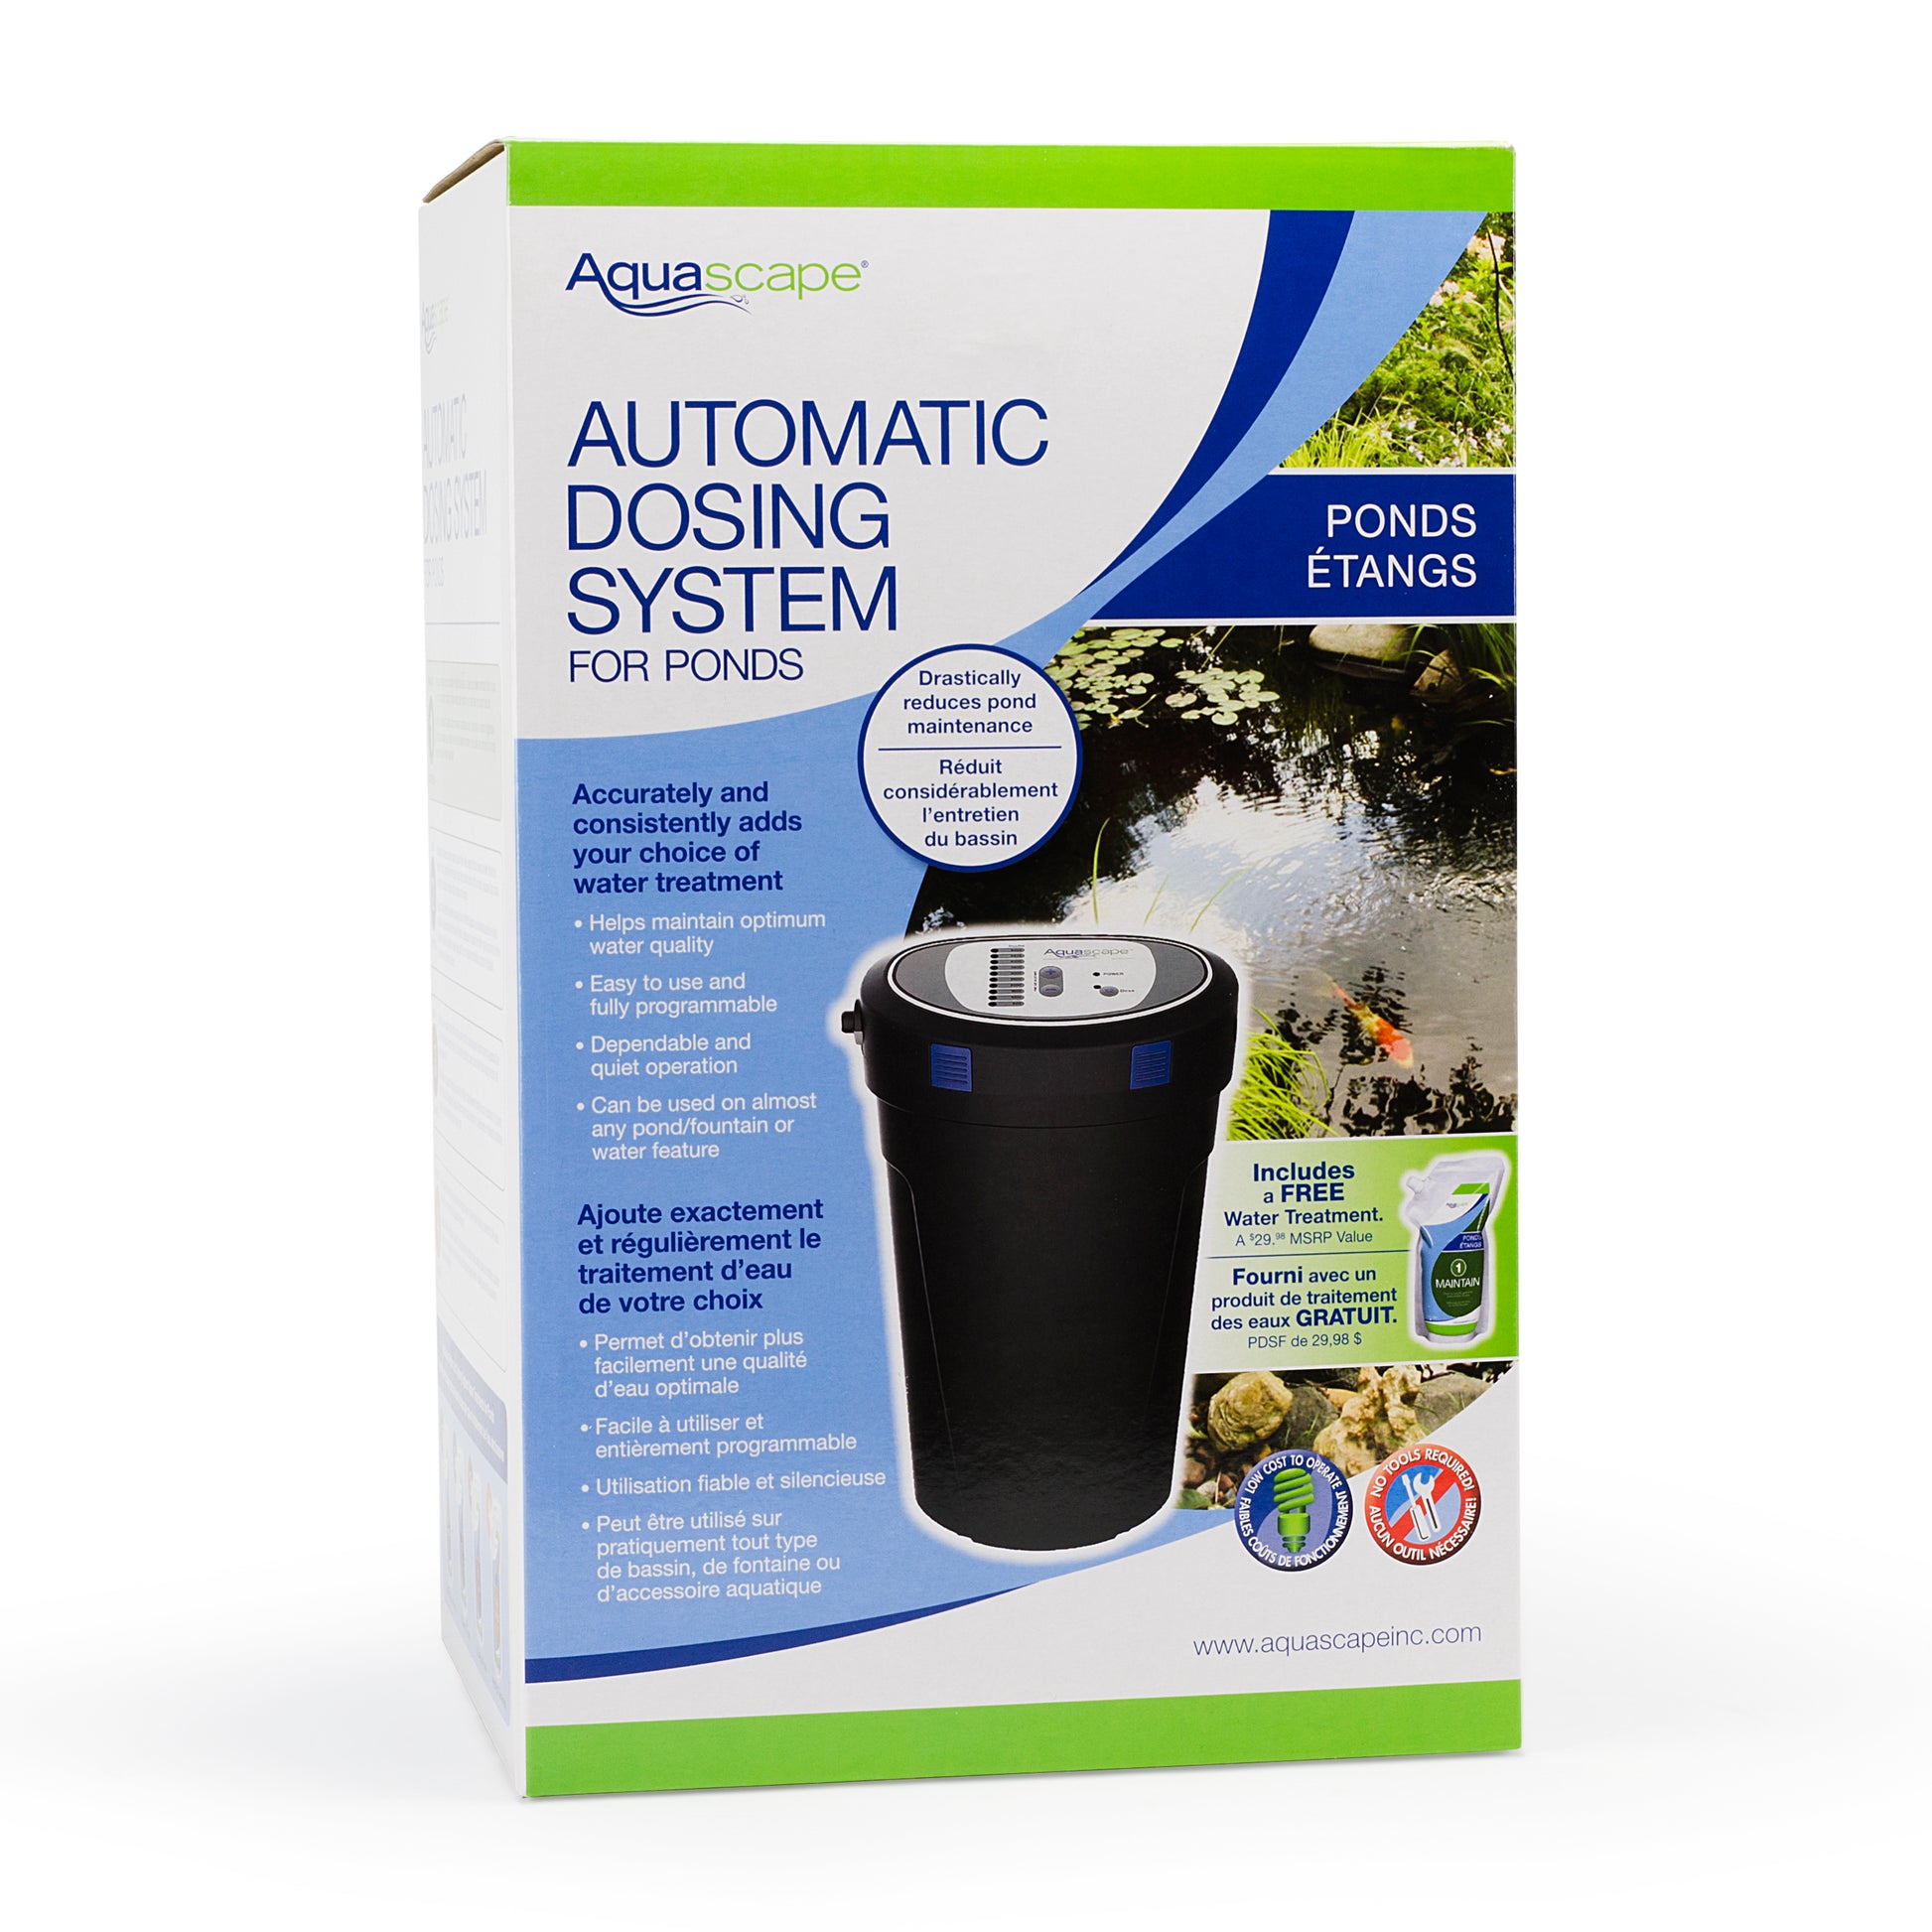 Dosing System “FOR PONDS” - WaterFeature.Shop